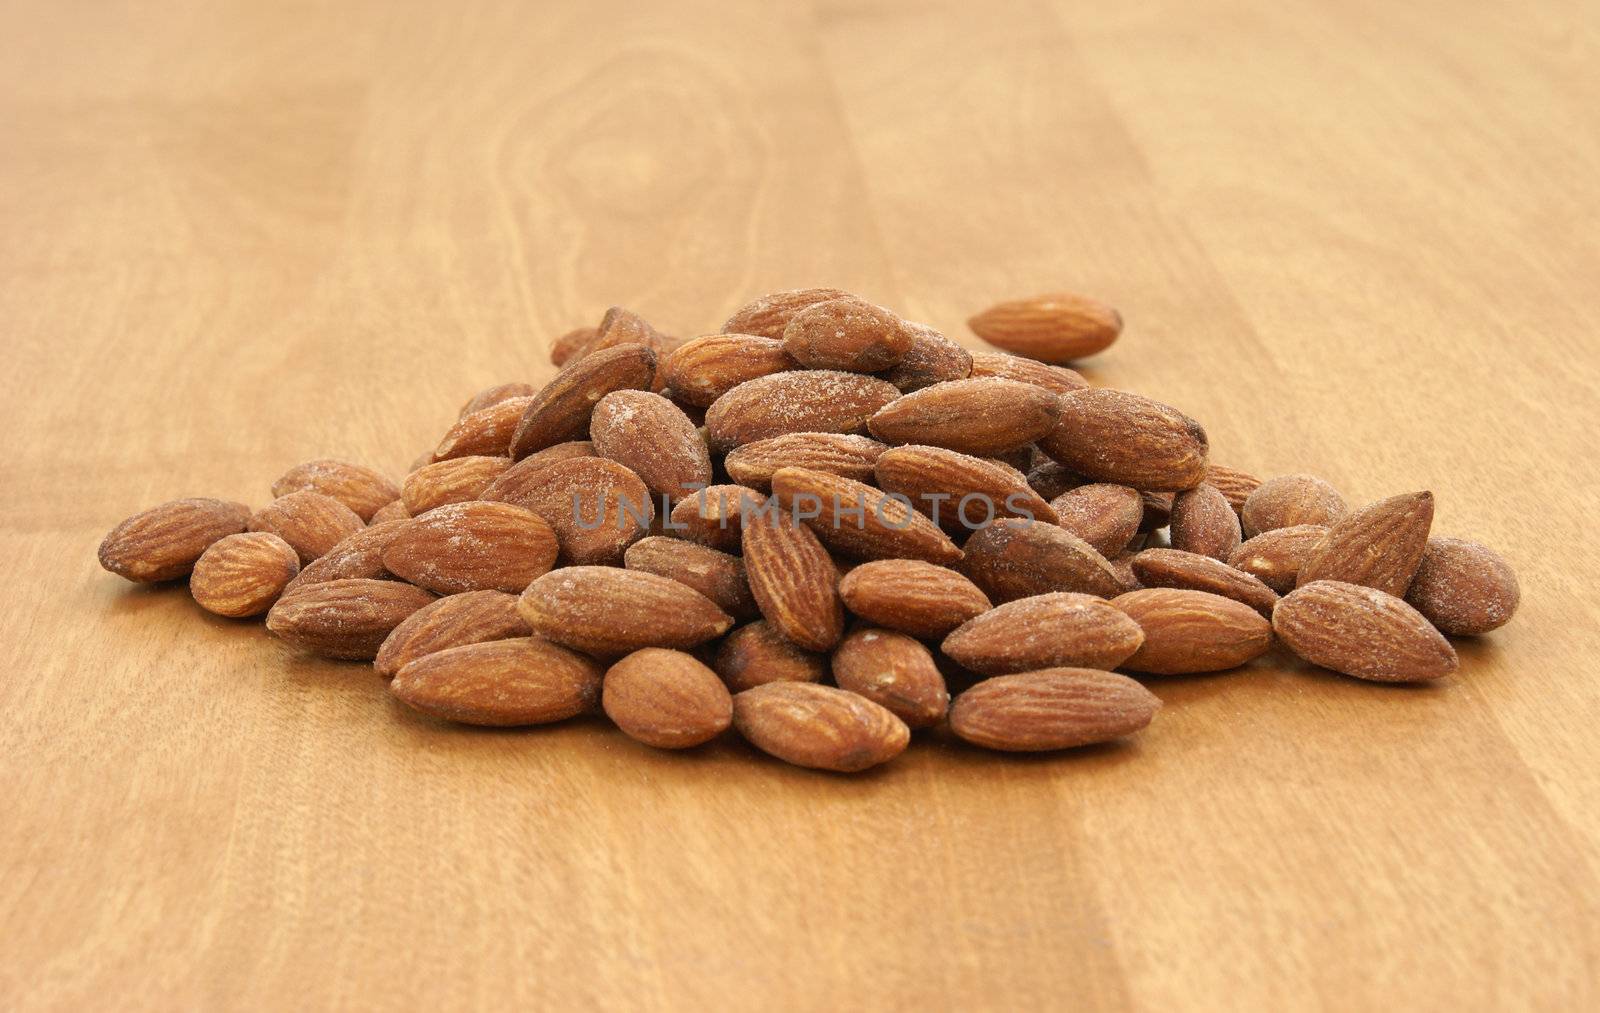 A pile of almonds on a wood background.